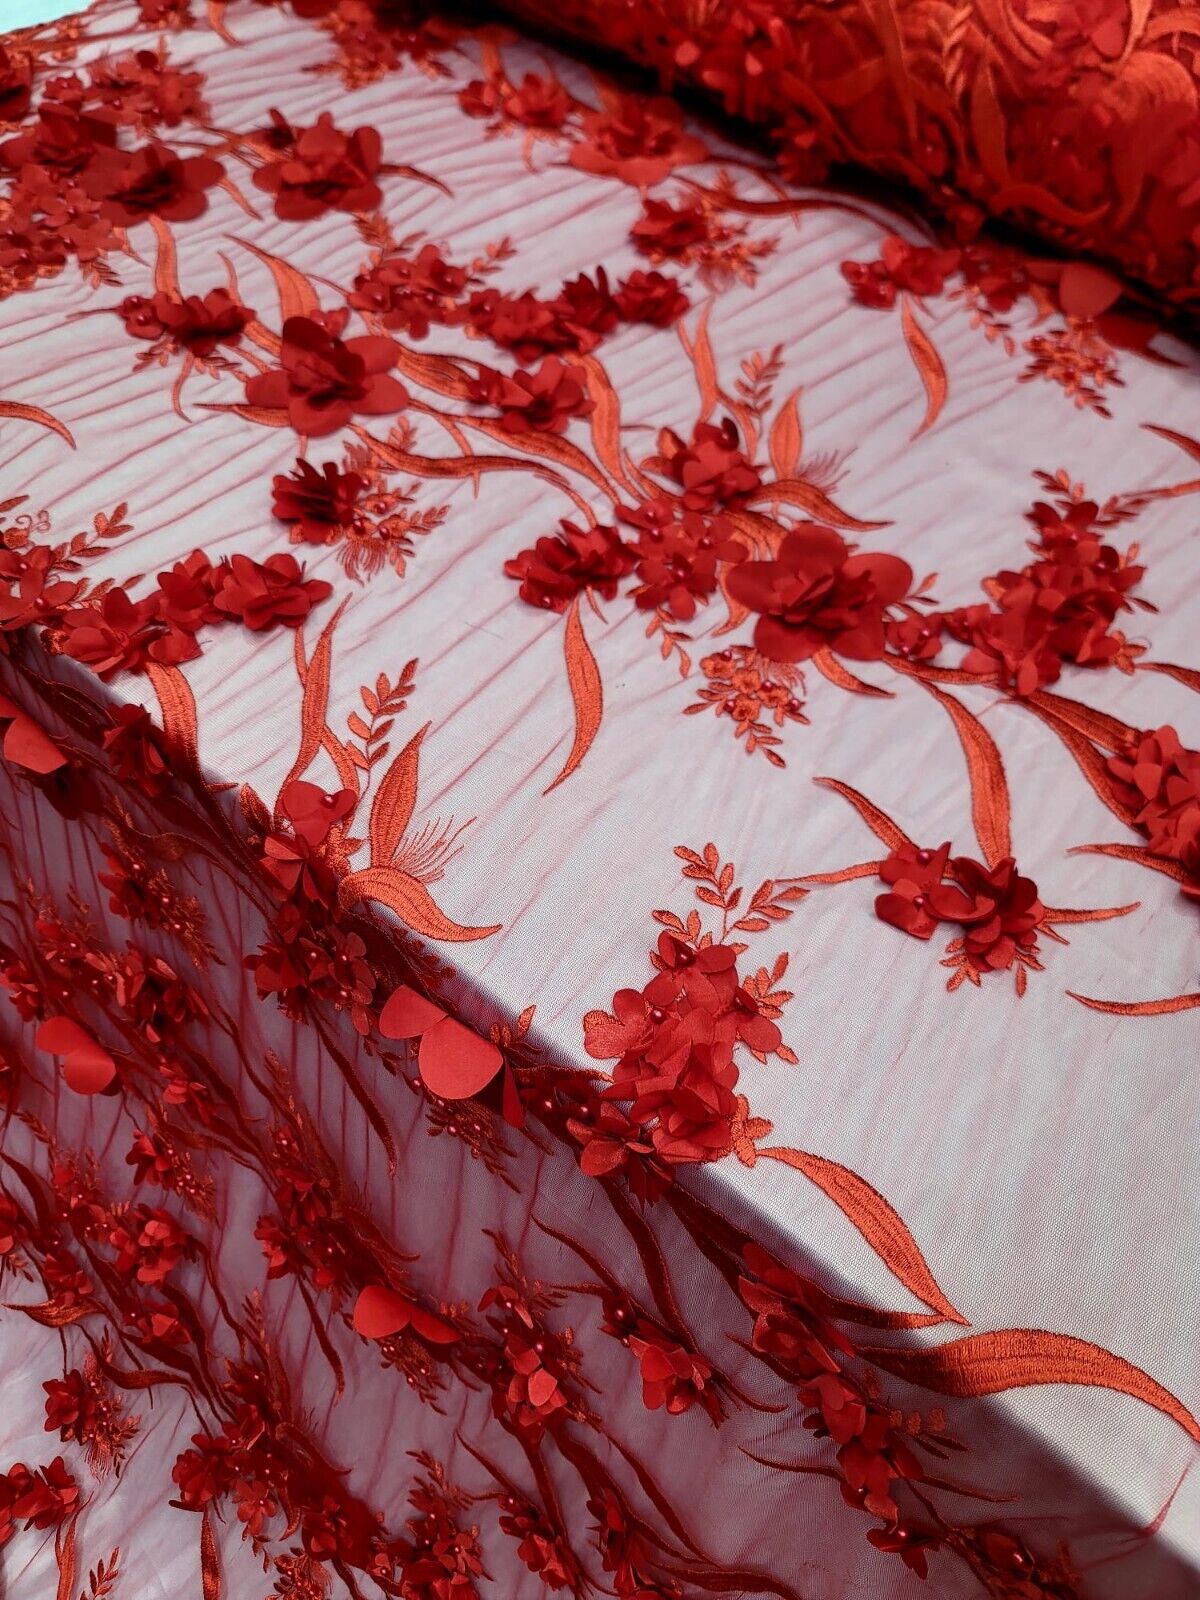 Red 3D Floral Embroidered Pearls Mesh Lace Fabric By The Yard